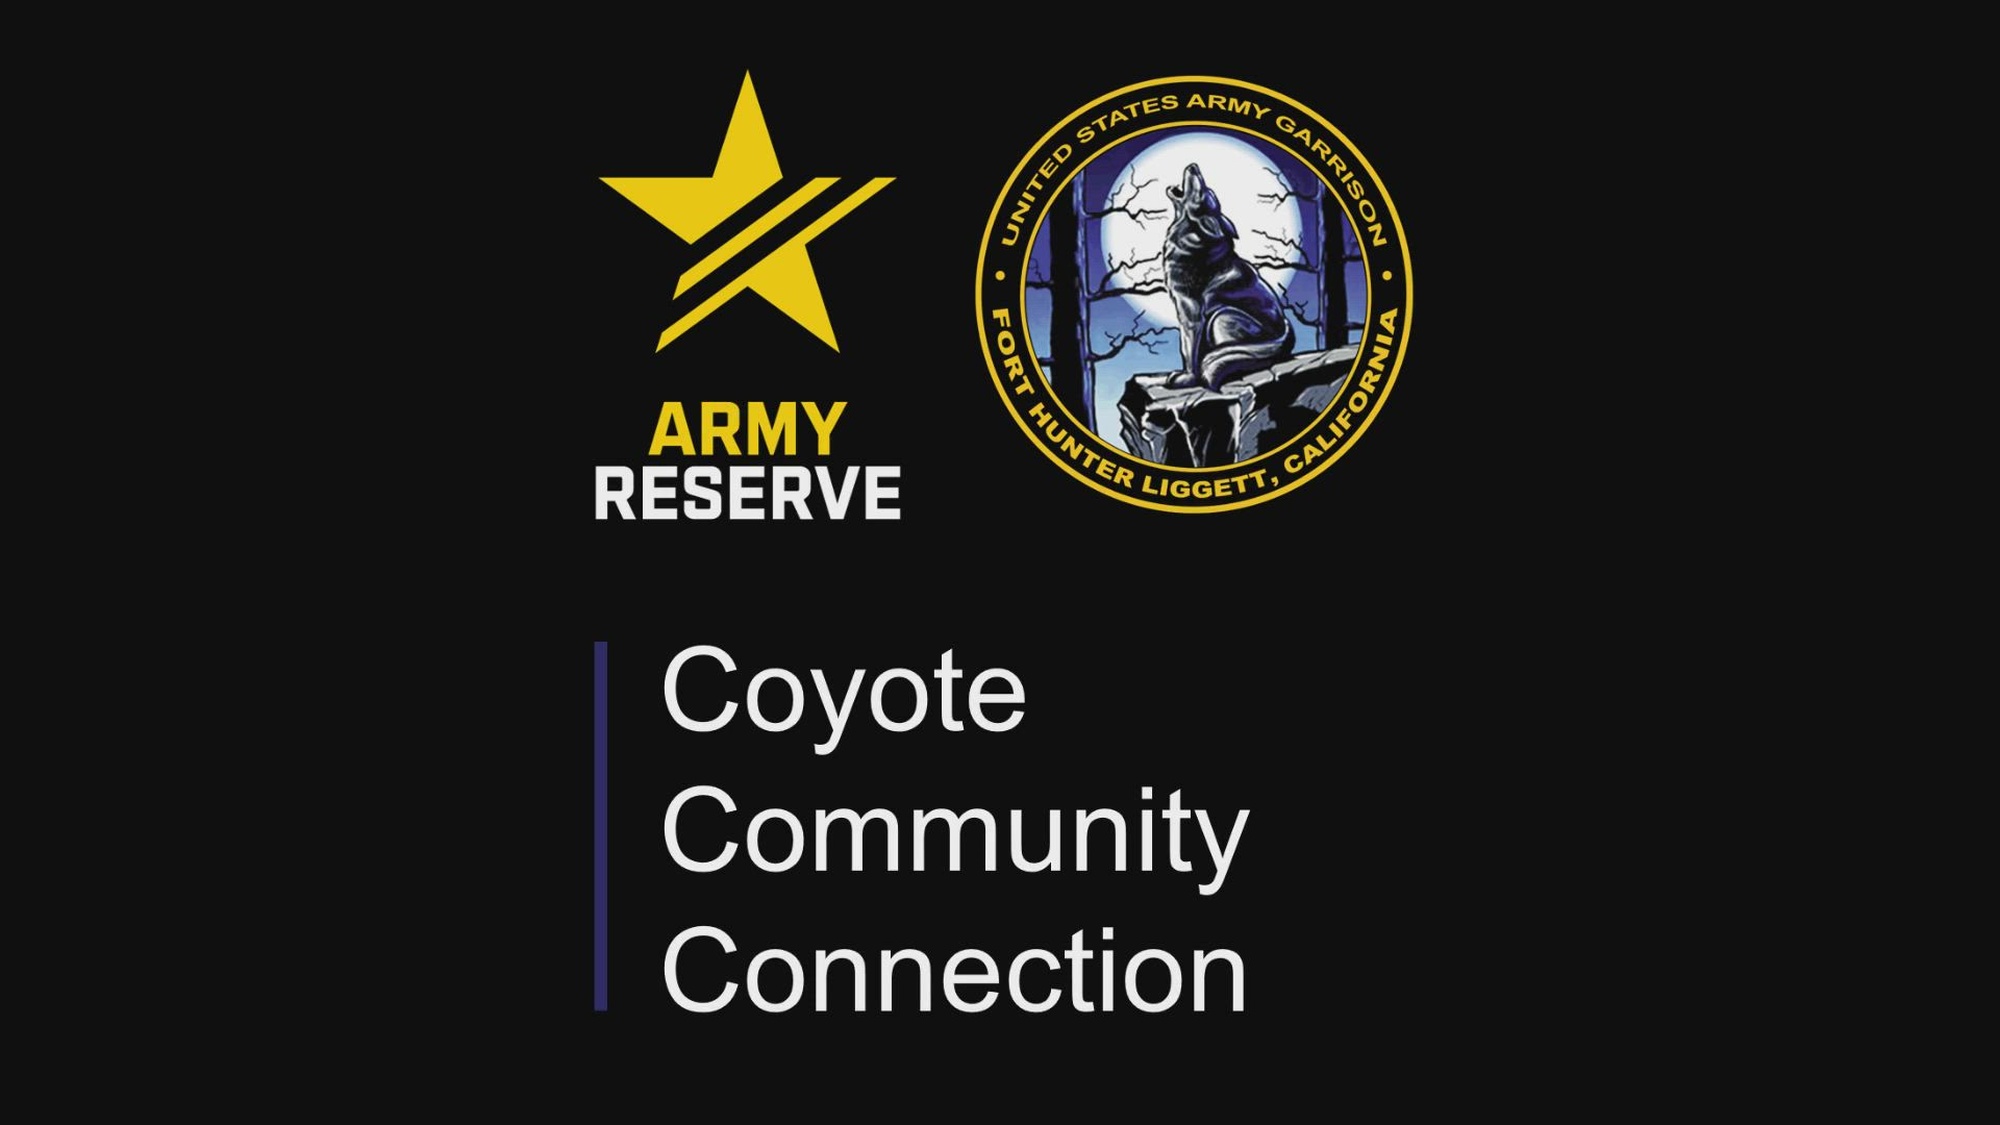 Welcome to the April "Coyote Community Connection." This month we focus on celebrating the U.S. Army Reserve's 116th birthday on April 23rd by recognizing the dedicated service of our 200,000 Army Reserve Soldiers and Civilians. This years theme is "Today's Army Reserve: Building Critical Skills for the Nation." The Army Reserve offers over 120 different career fields and draws talent right from the community. Soldiers can answer their calling while building on their civilian profession or try a new career that fulfills a separate purpose.